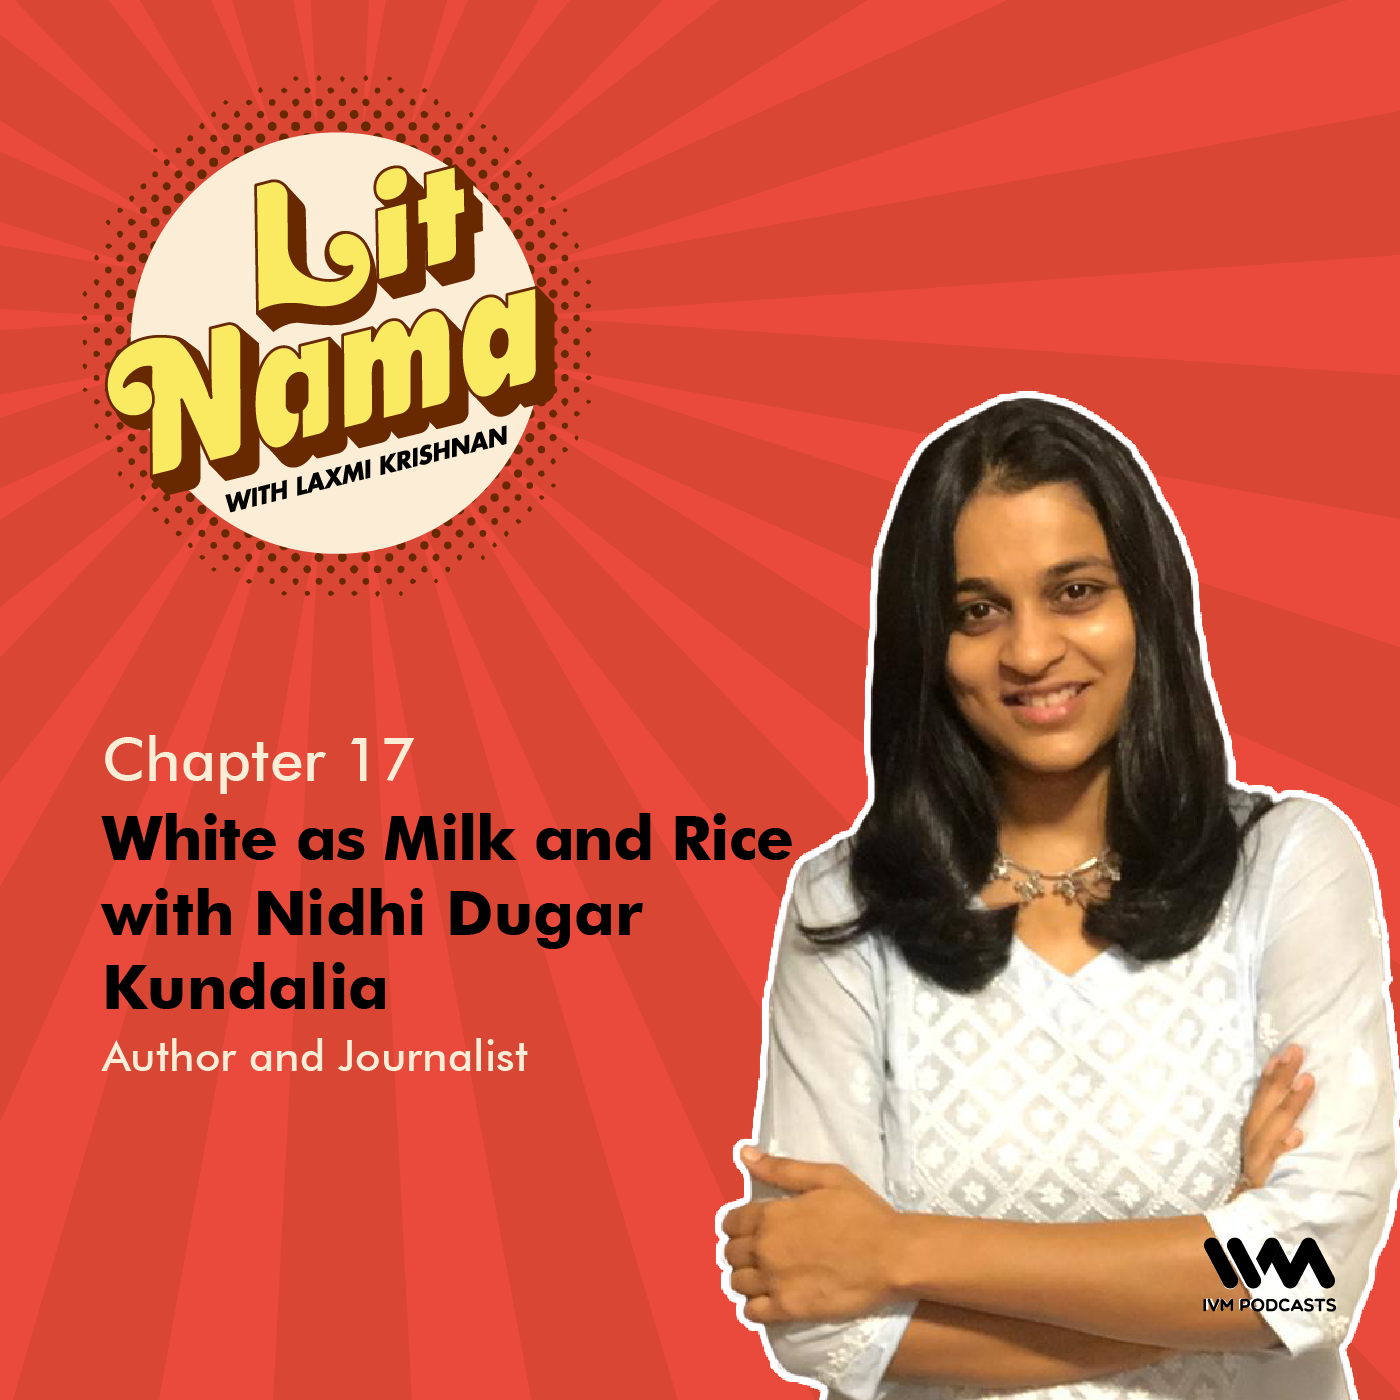 Chapter. 17: White as Milk and Rice with Nidhi Dugar Kundalia